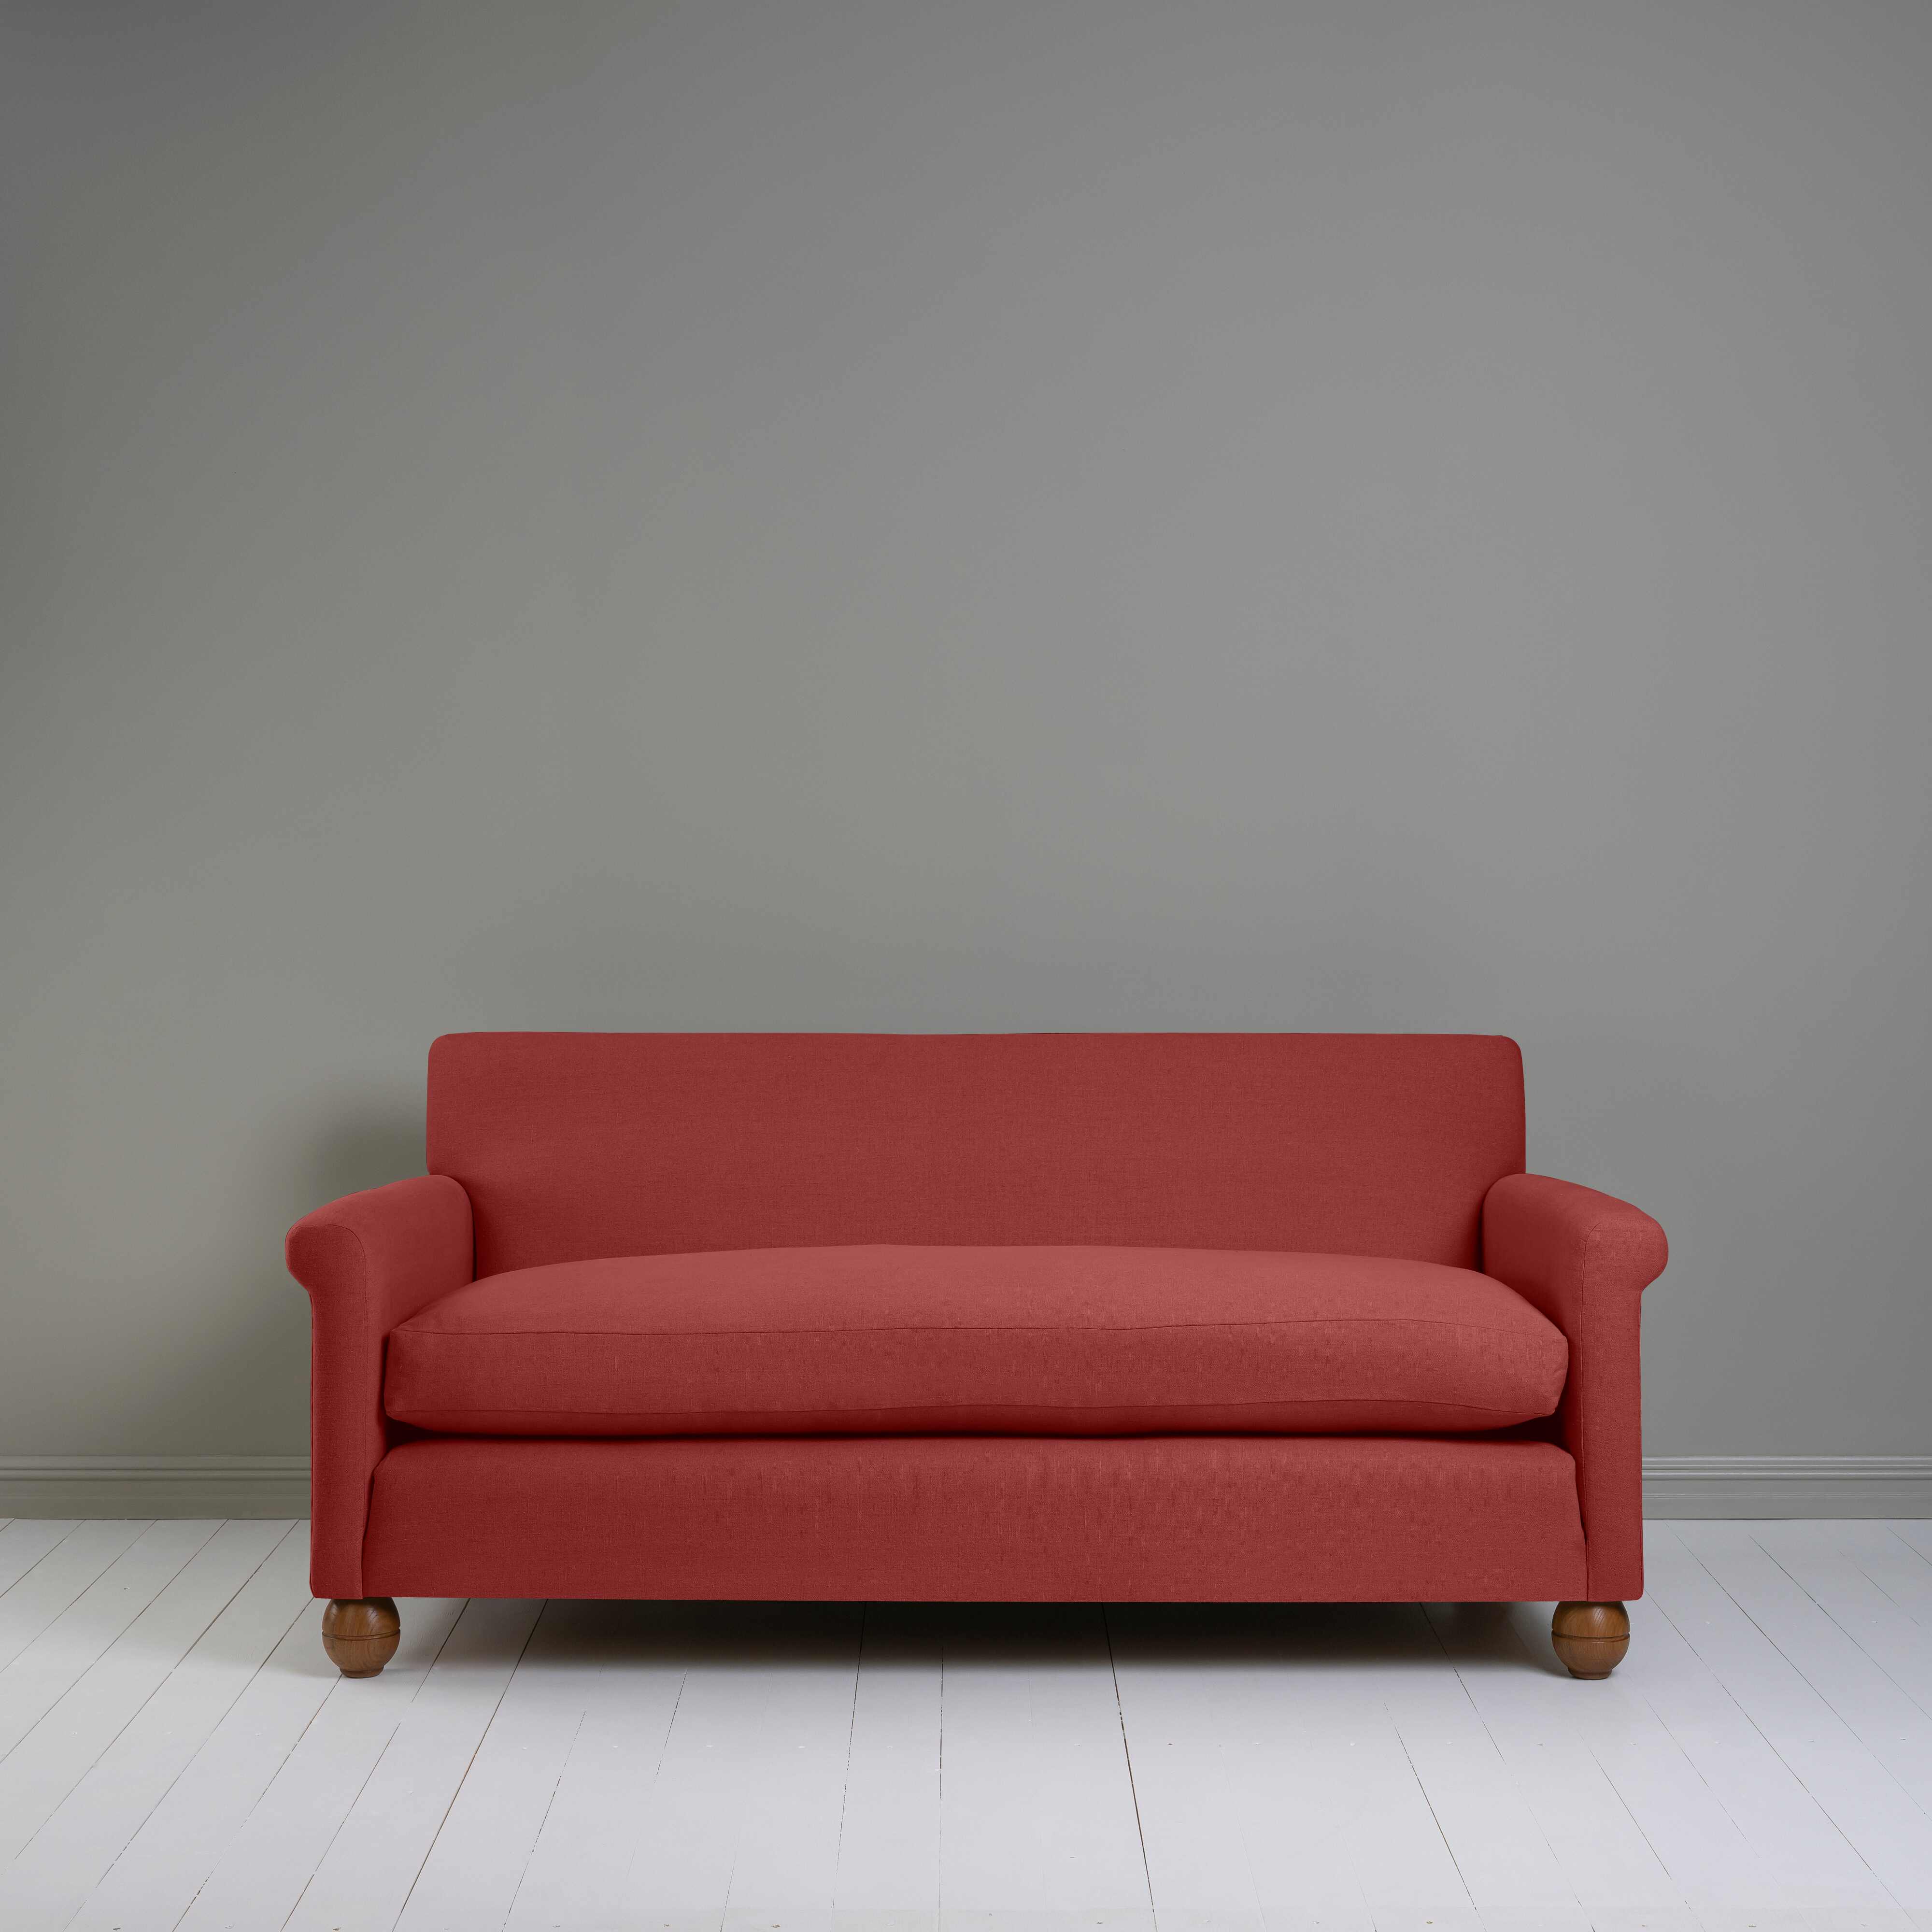  Idler 3 Seater Sofa in Laidback Linen Rouge 